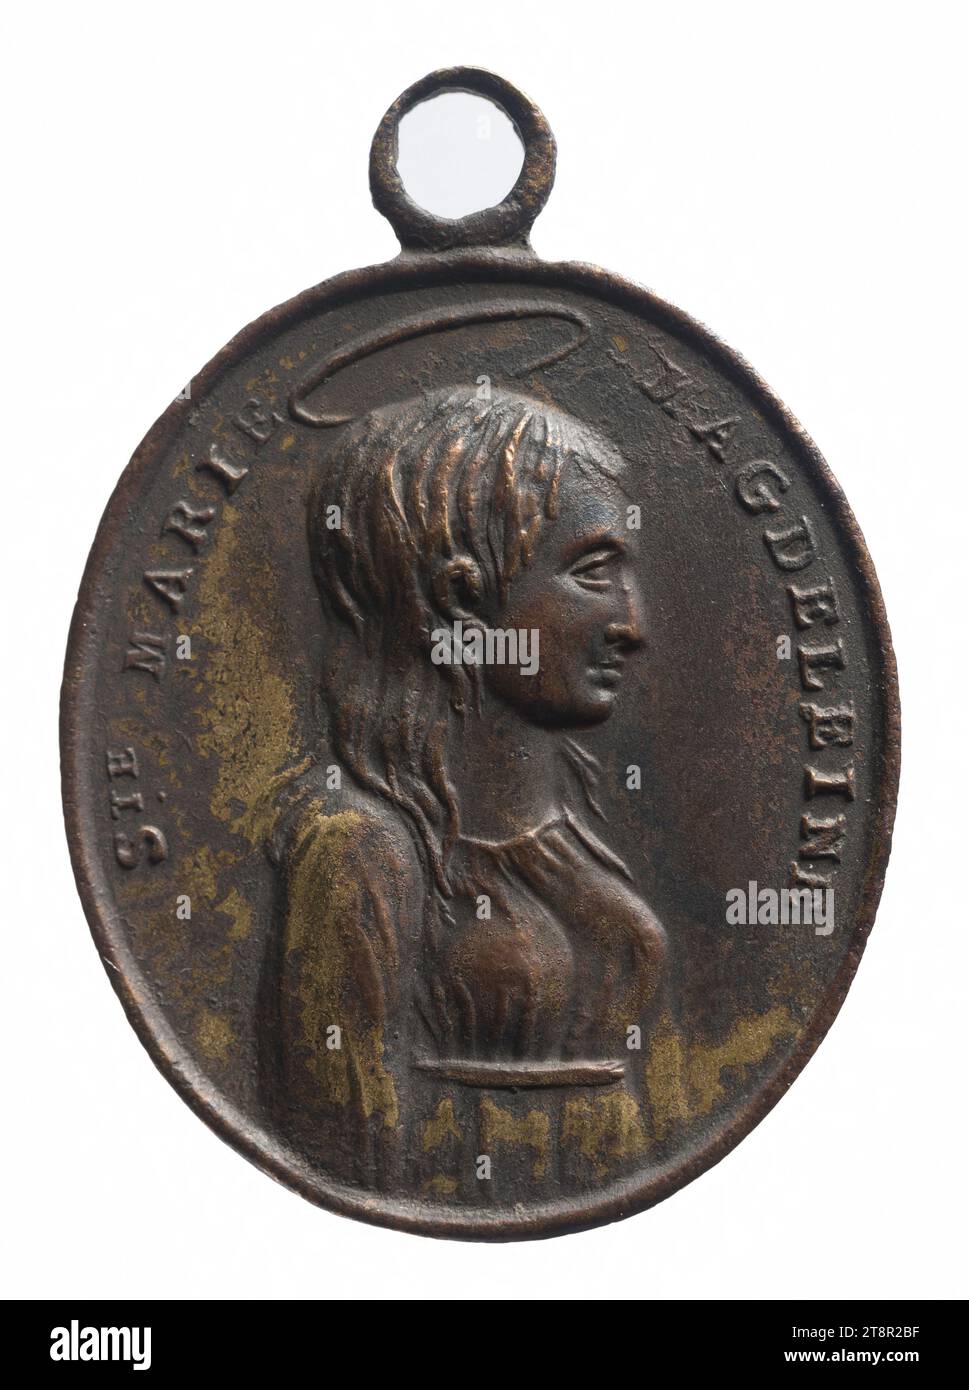 Saint Mary Magdalene, 19th century, Numismatic, Medal, Copper, Gilt = gilding, Dimensions - Work: Height: 2.6 cm, Width: 2.2 cm, Weight (type dimension): 5.87 g Stock Photo